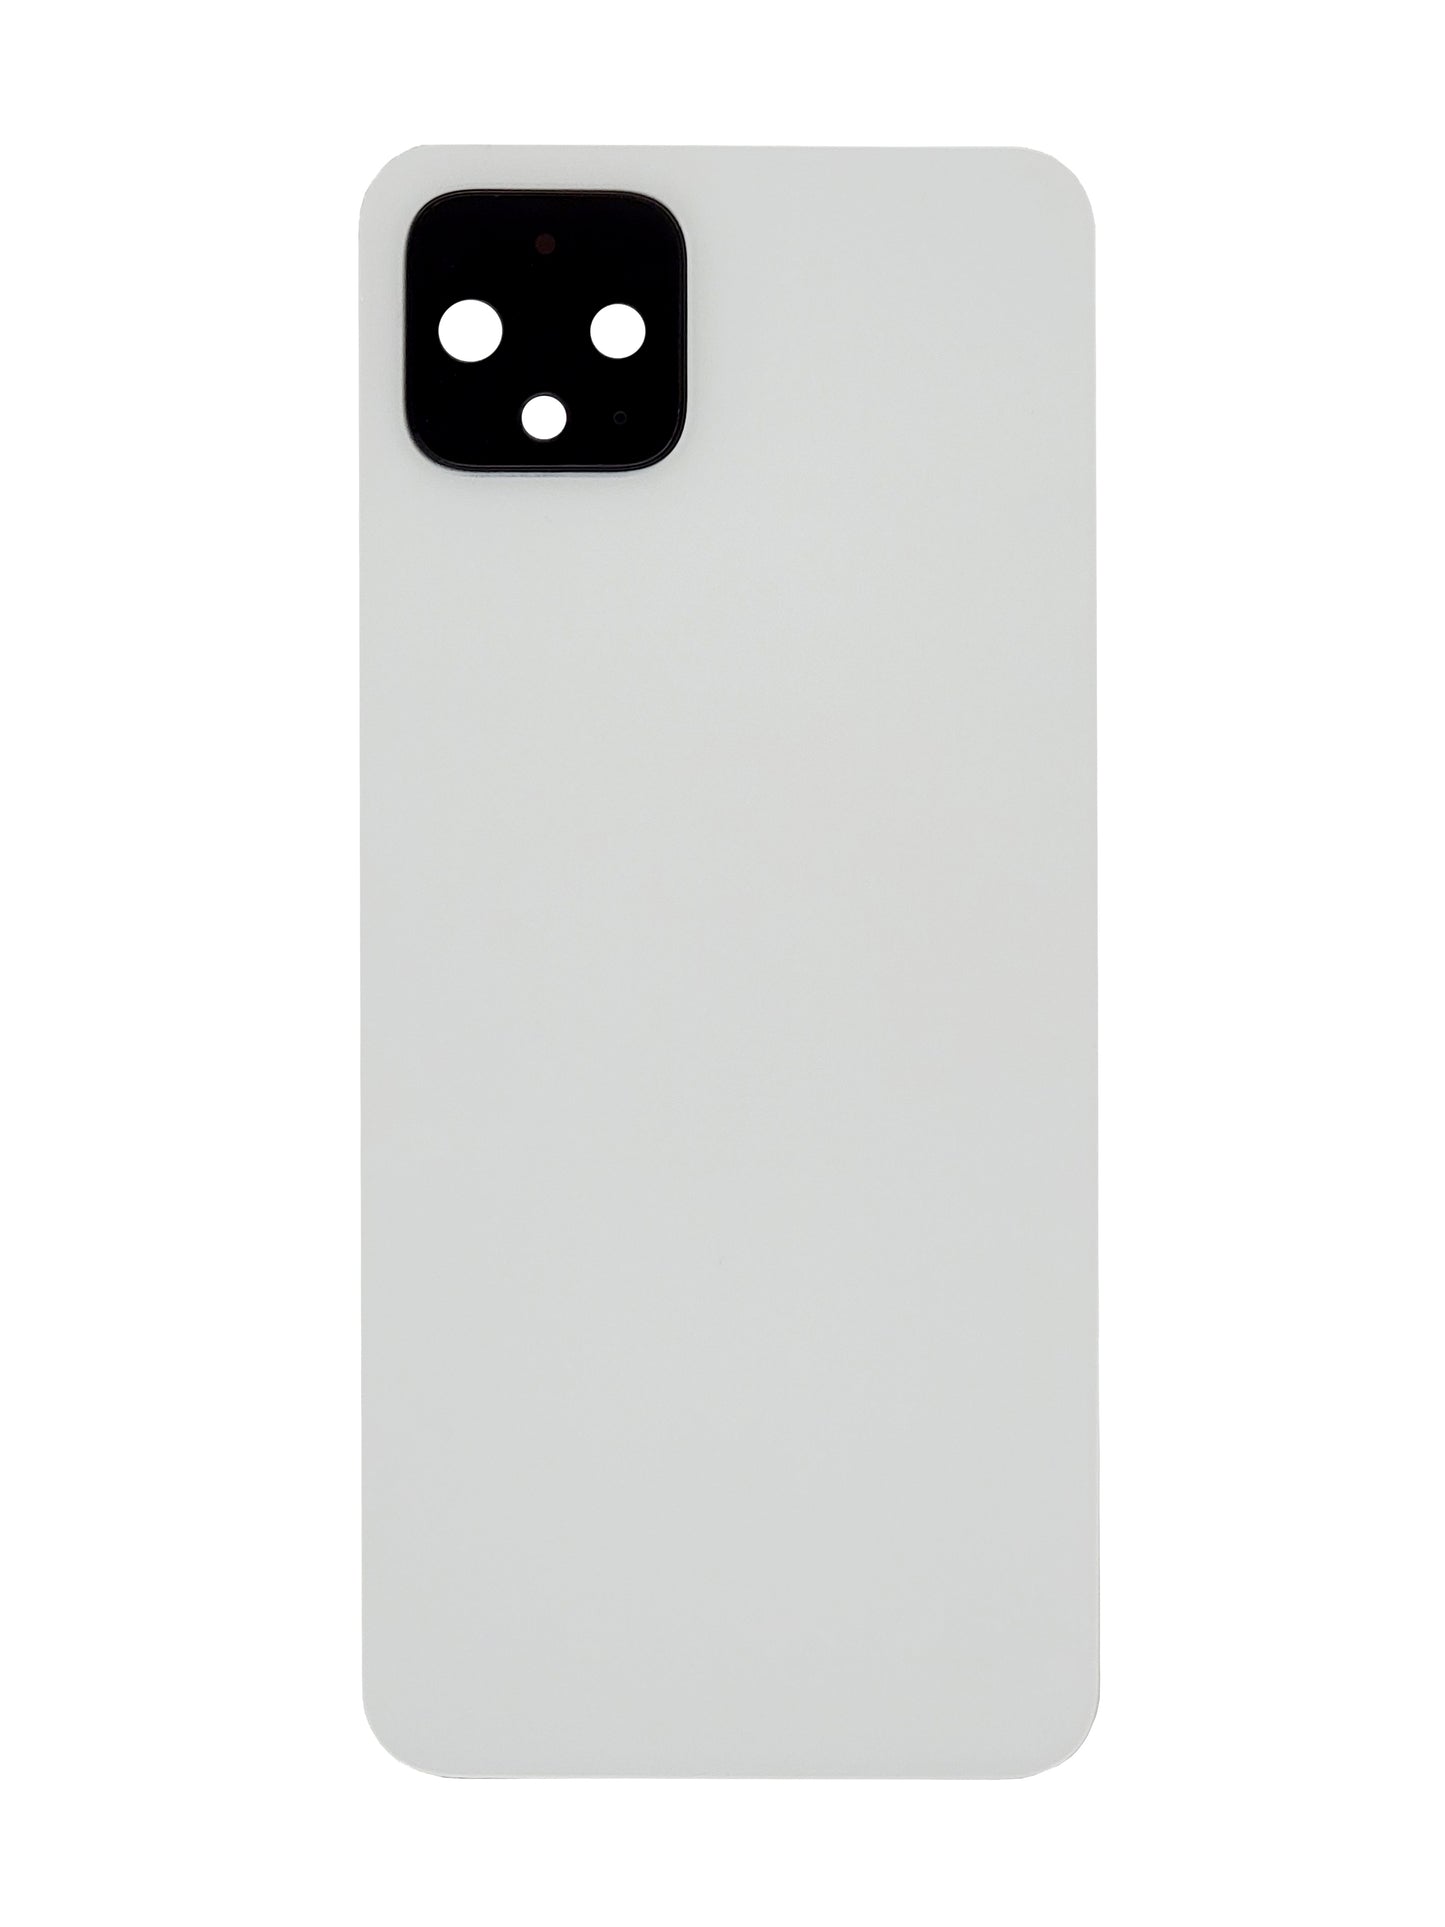 GOP Pixel 4 Back Cover (White)